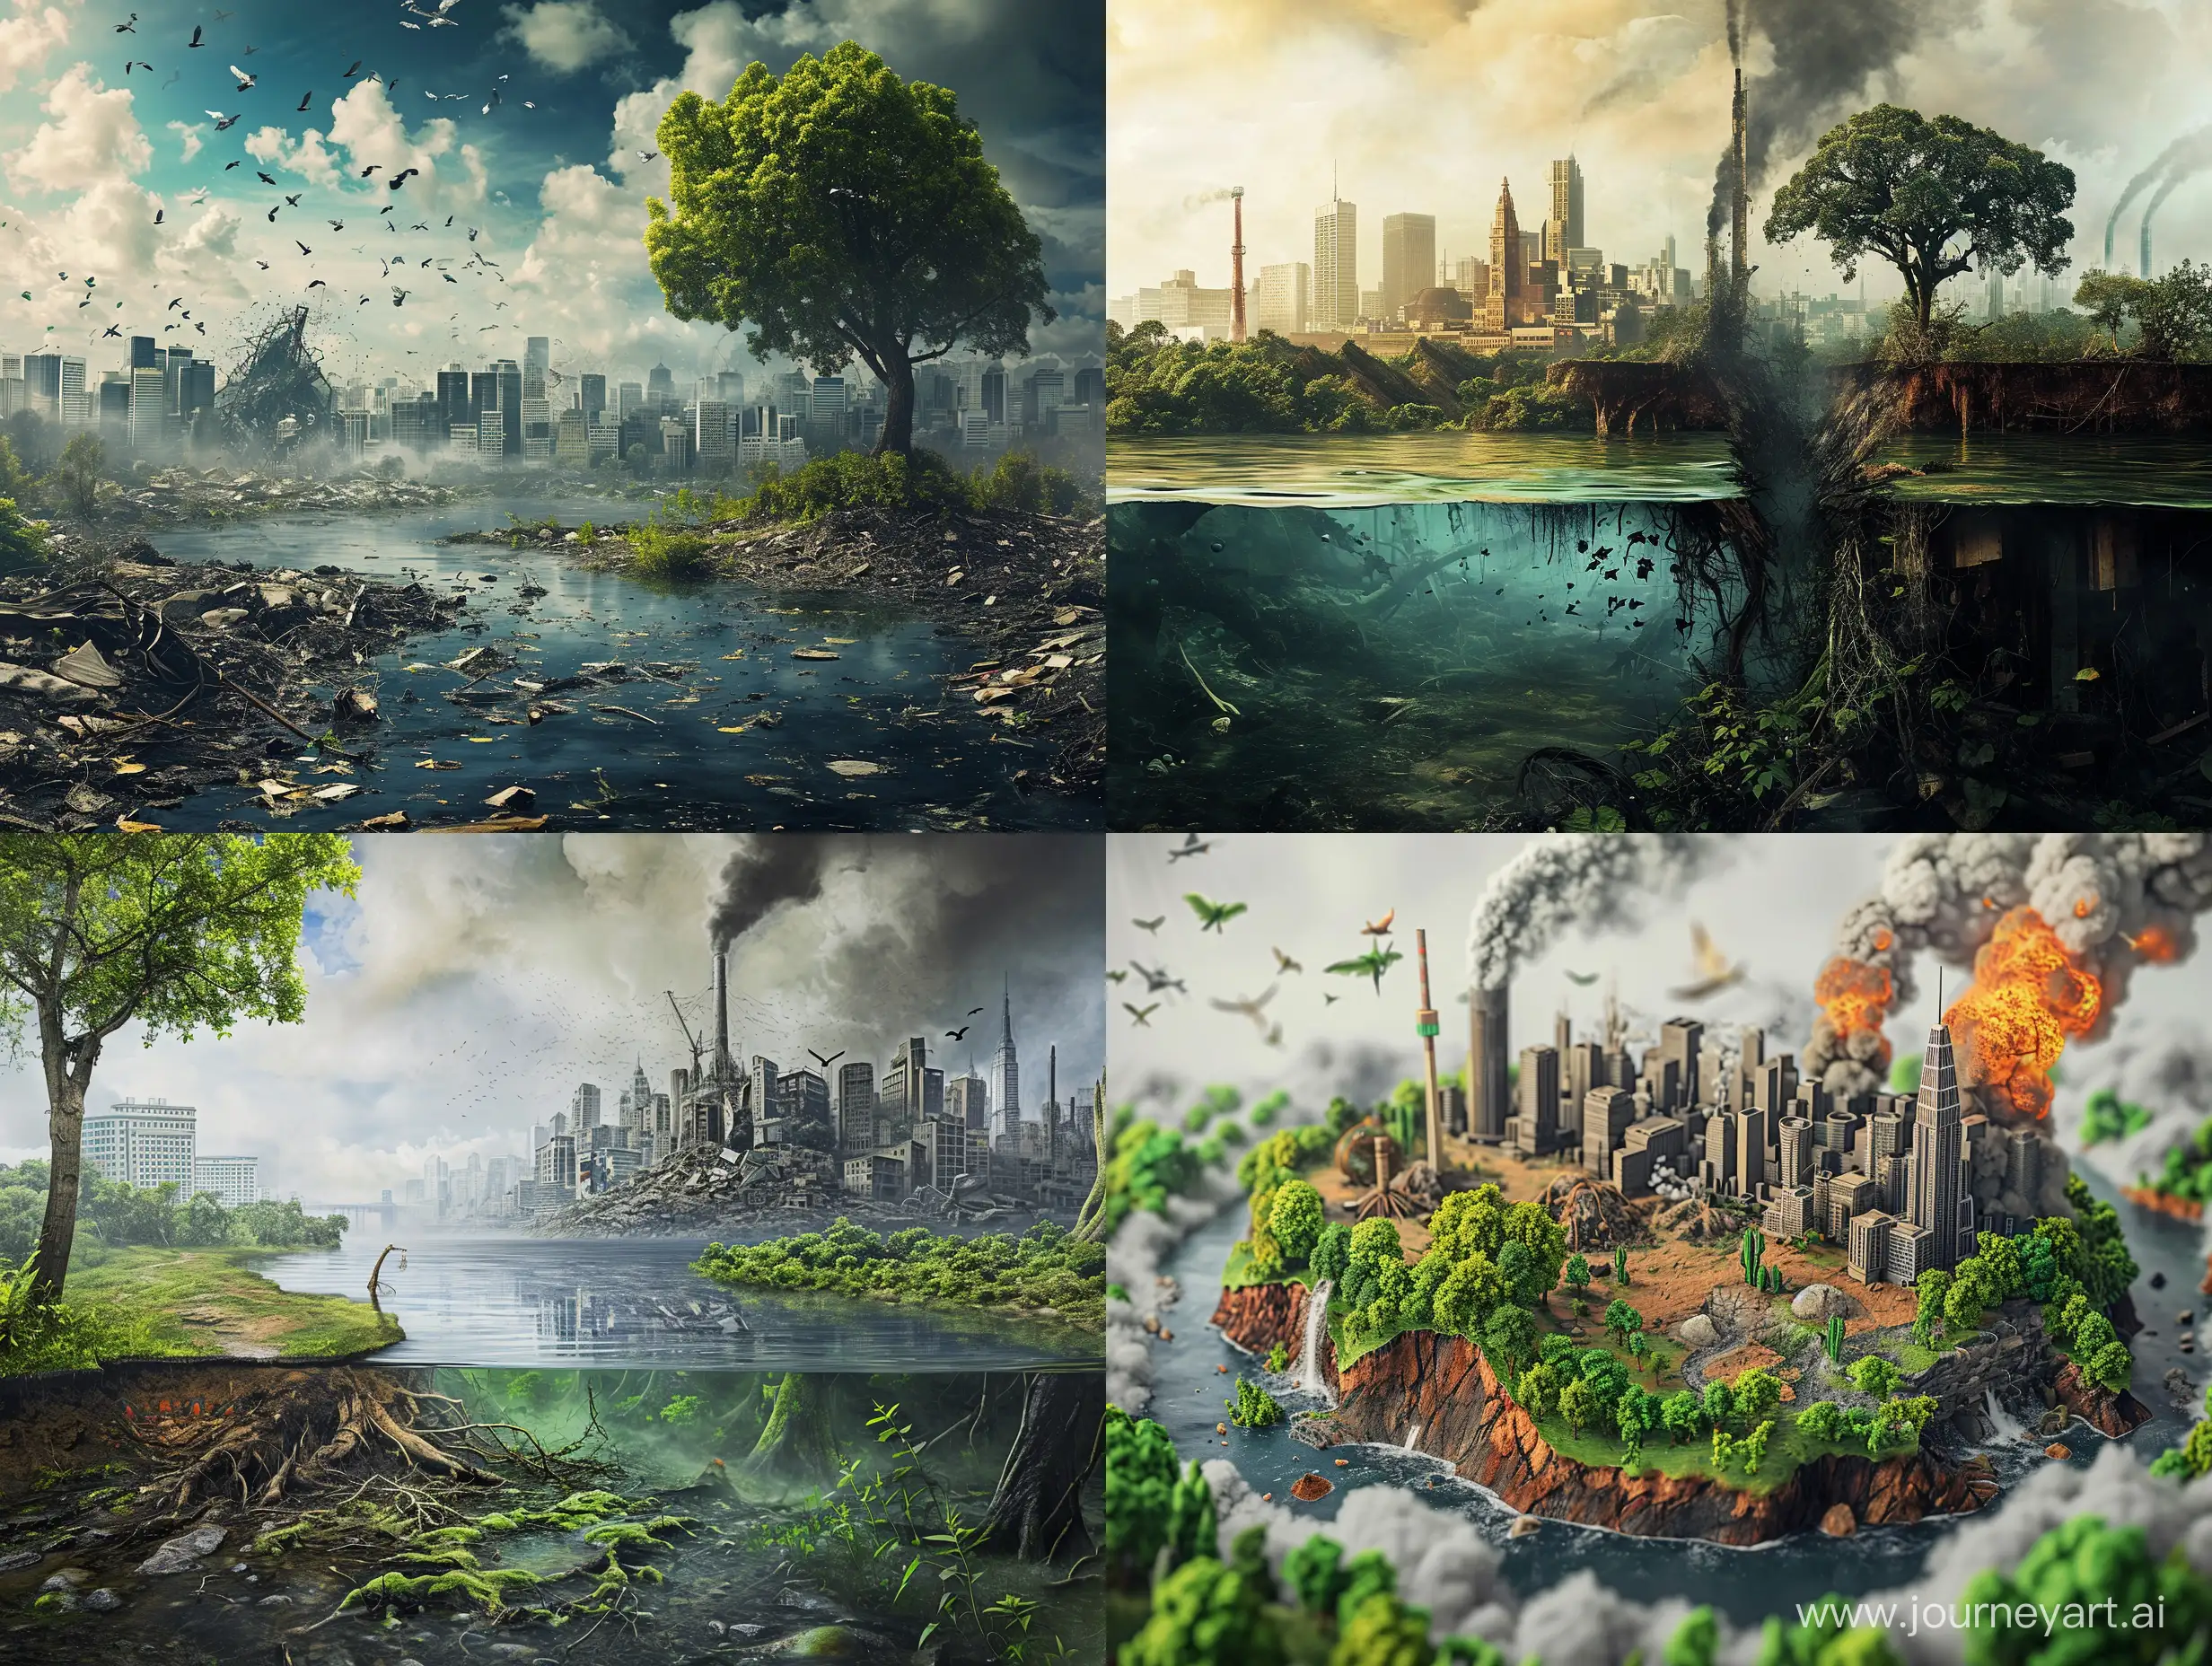 environmental destruction because of  water and air pollution, deforestation, global warming, mining and over consumption of resources due to growth and development that results into inequality and injustice of poor communities